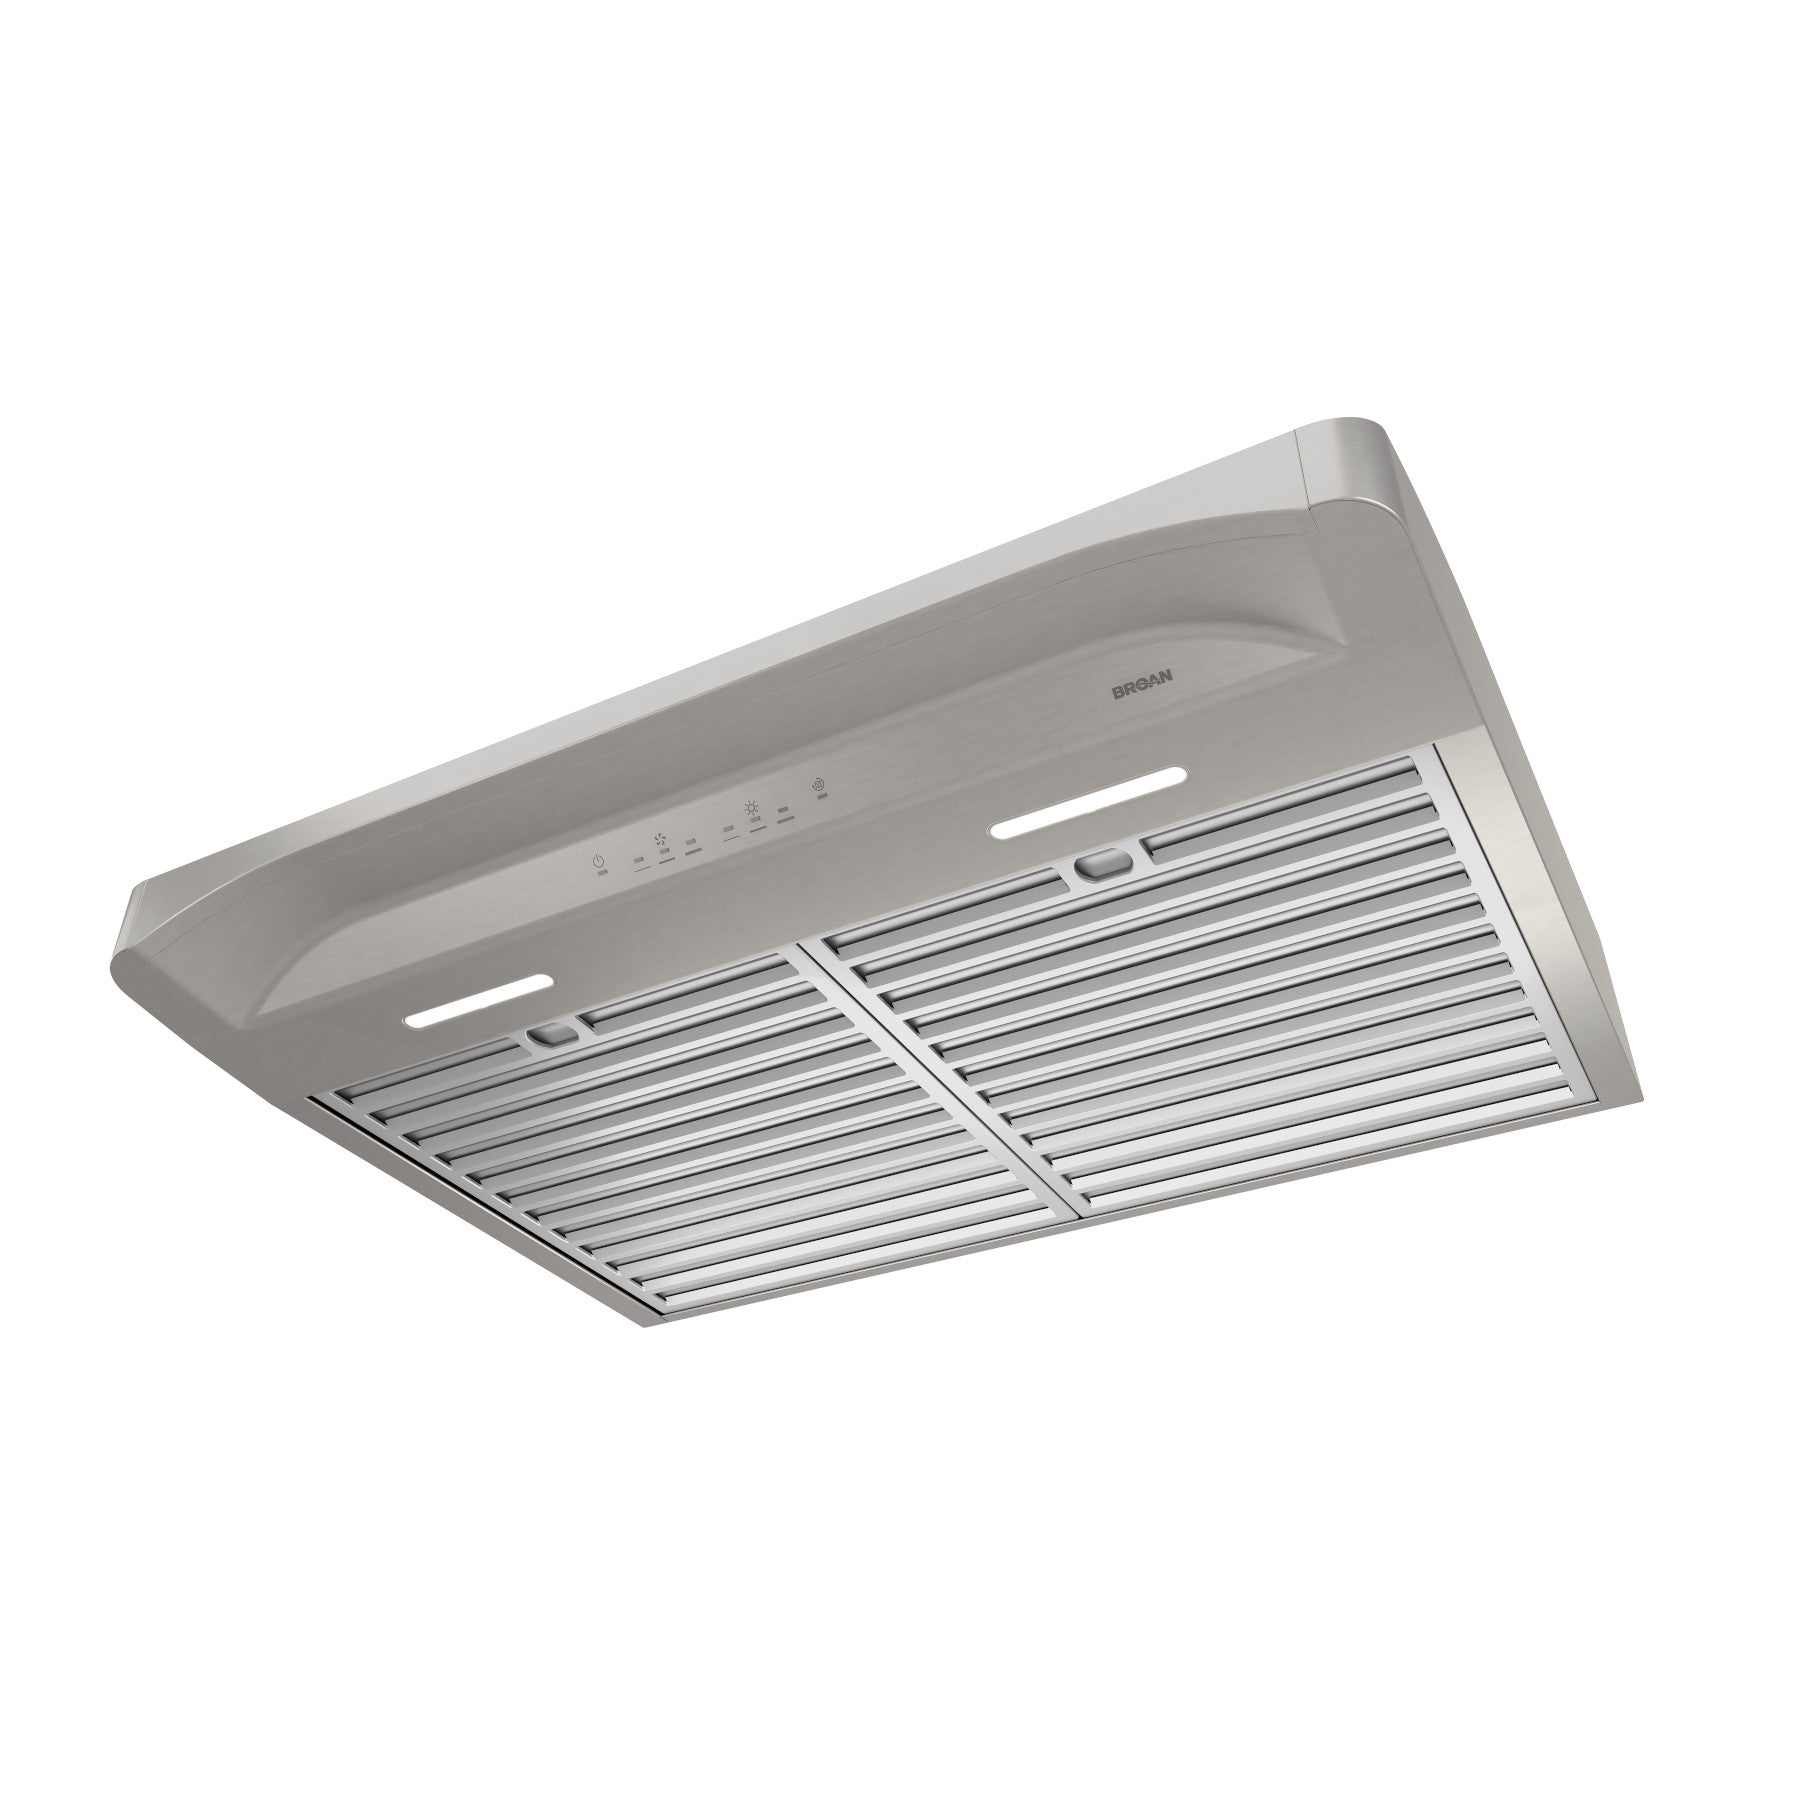 Broan - 30 Inch 400 CFM Under Cabinet Range Vent in Stainless - BQLA130SS